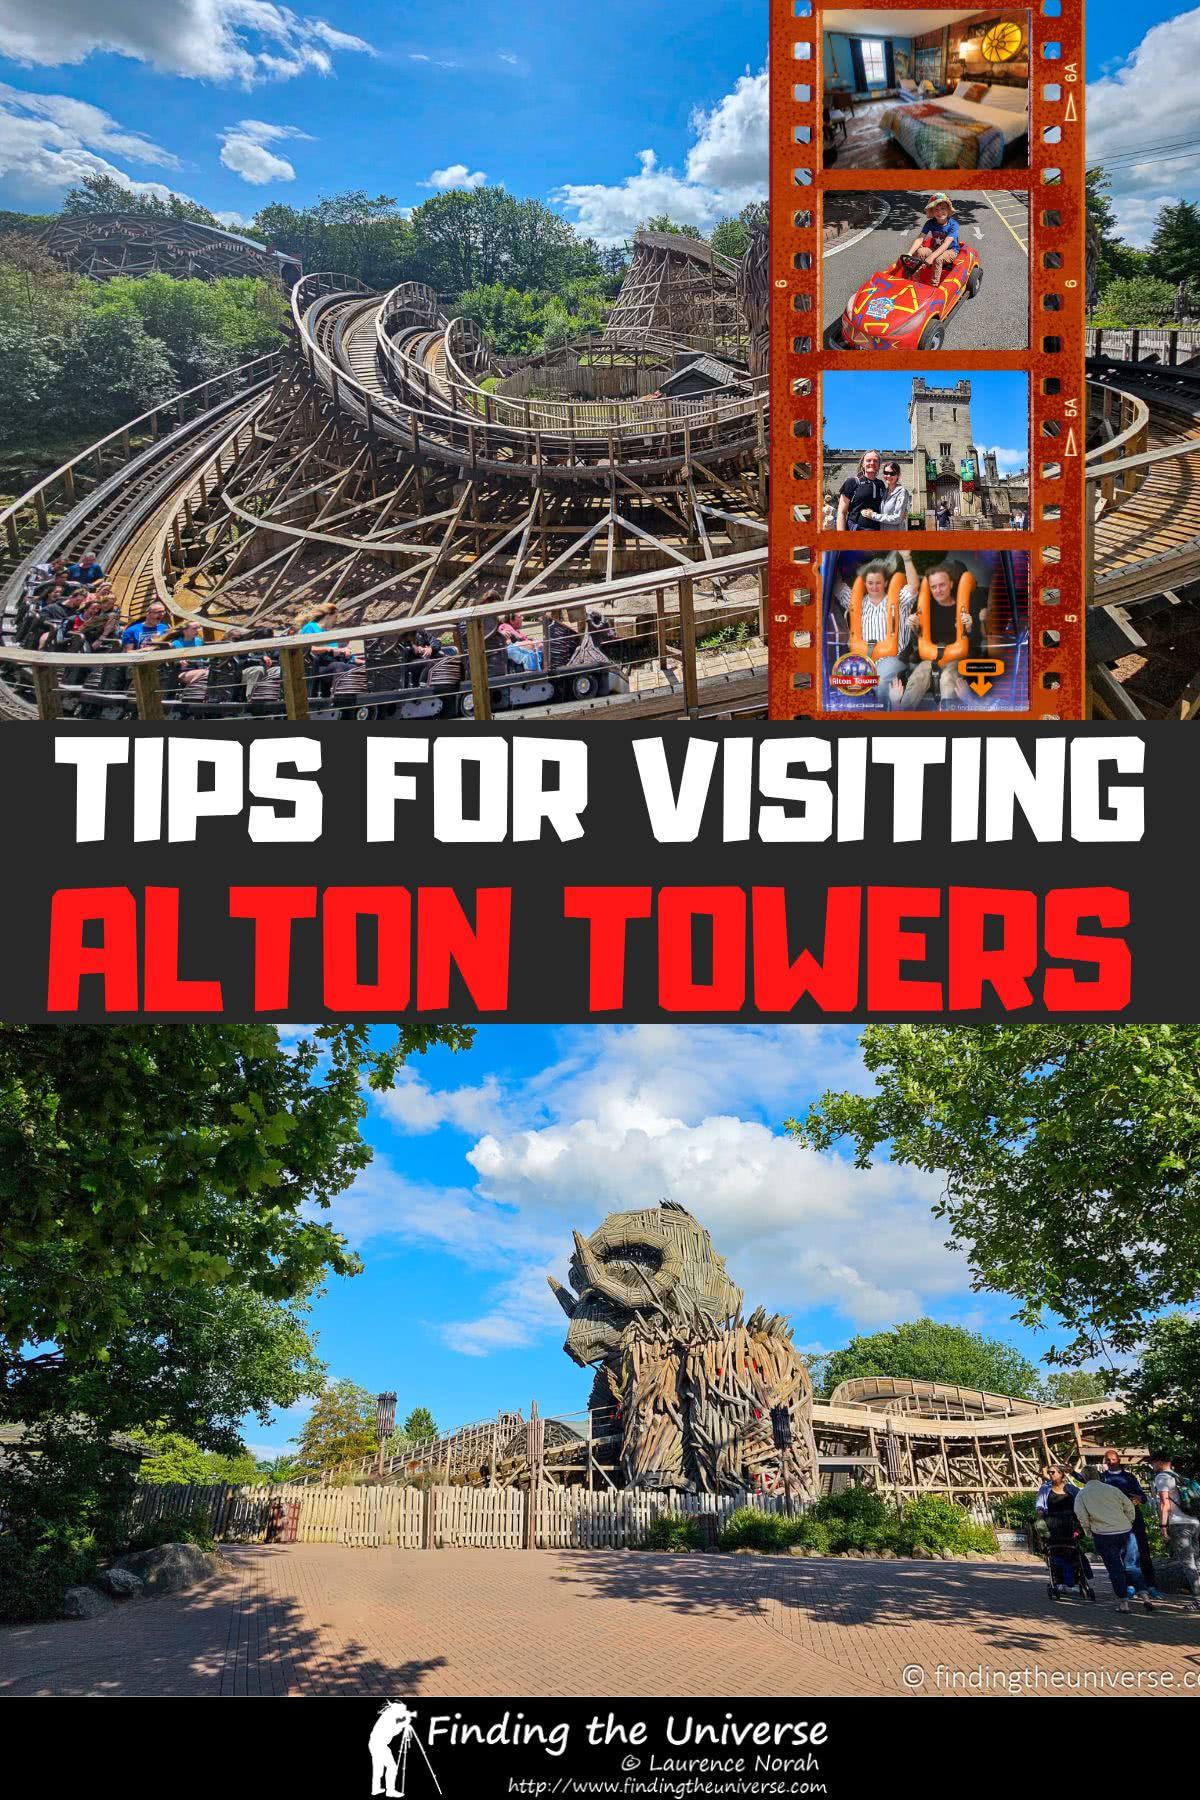 All the tips you need to make the most of your time at Alton Towers, one of the best theme parks in the UK!